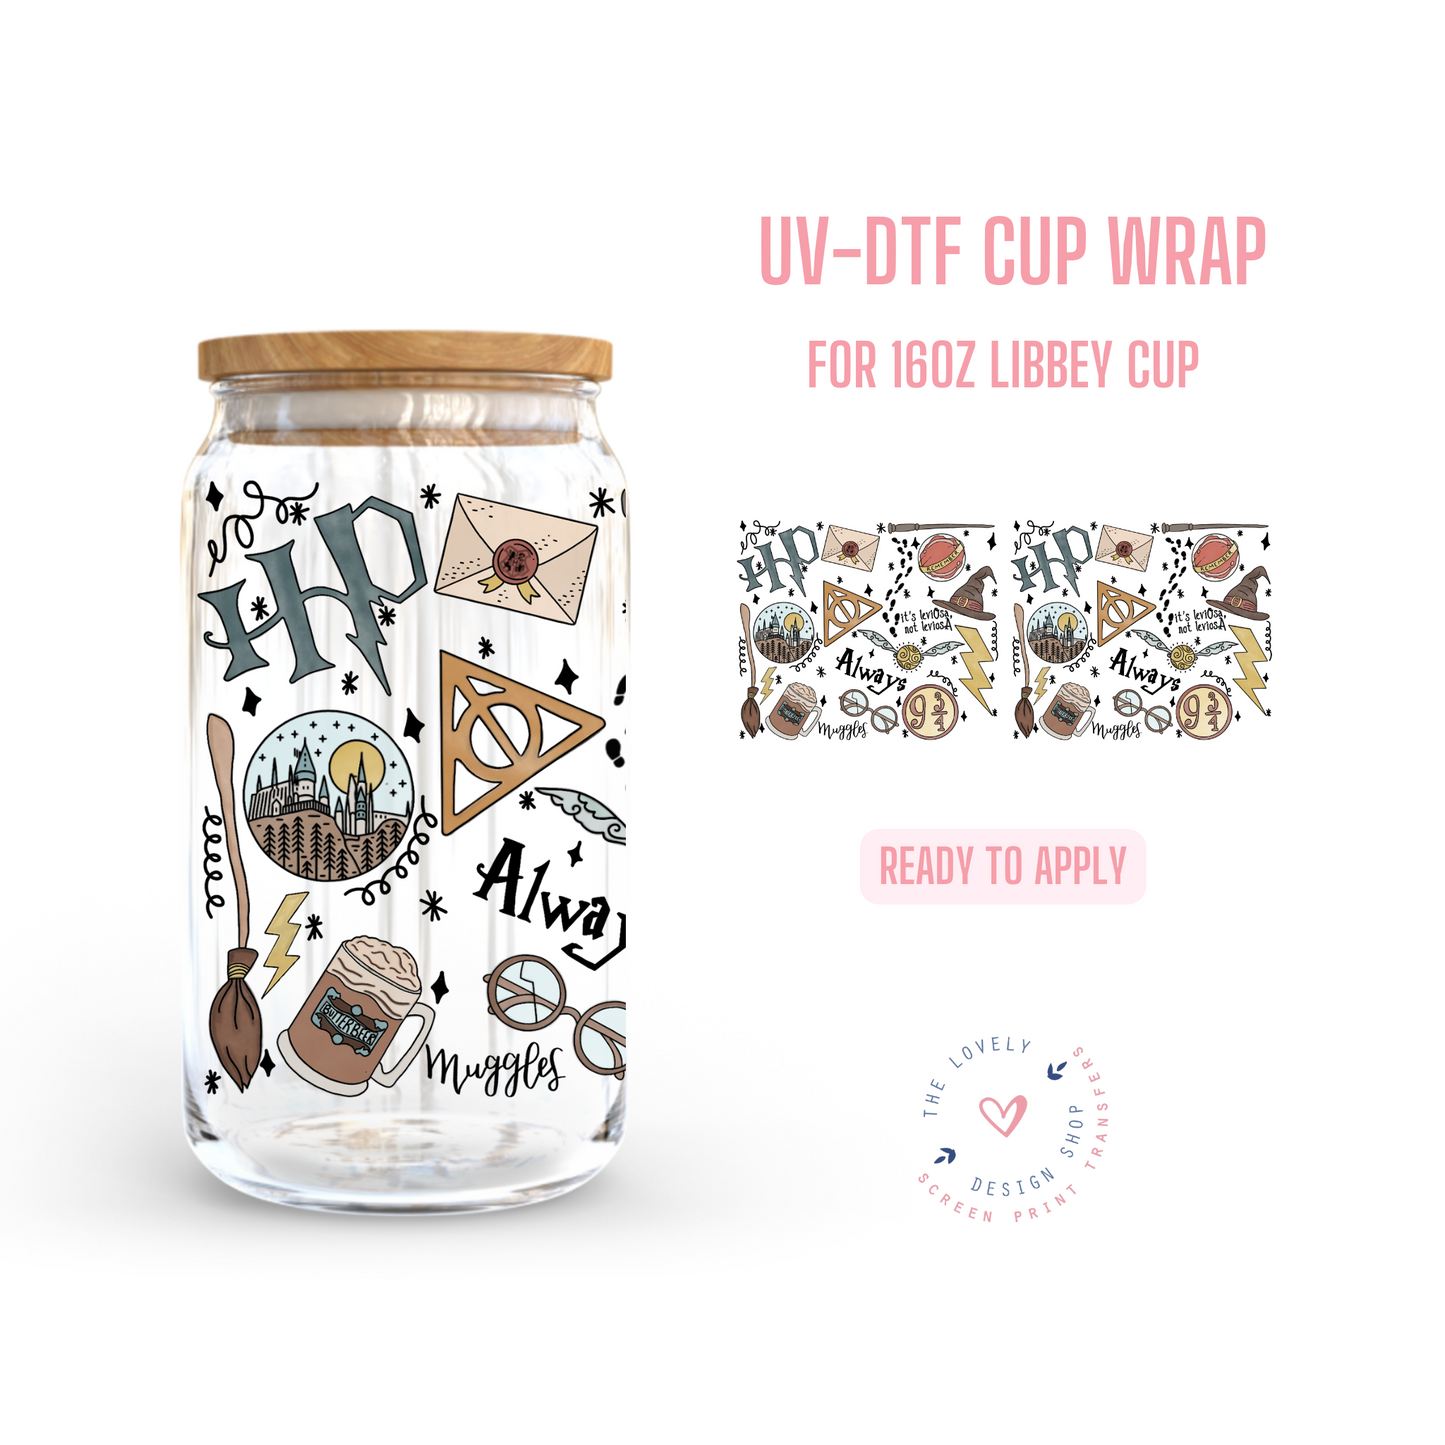 School of Wizards Doodles - UV DTF 16 oz Libbey Cup Wrap (Ready to Ship)